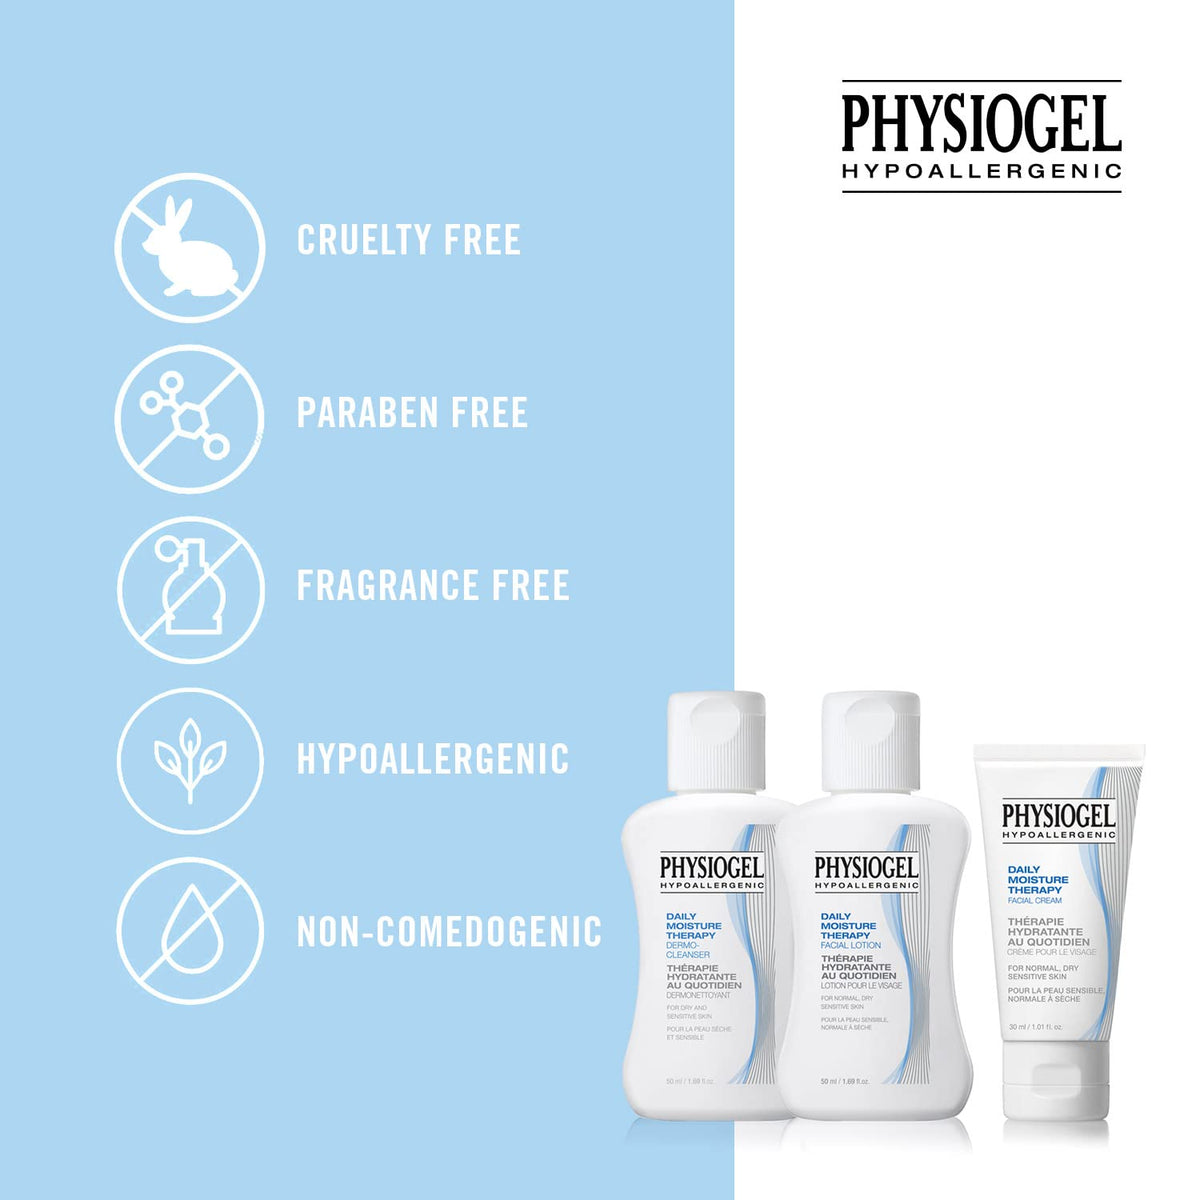 Physiogel Daily Moisture Therapy Travel Set